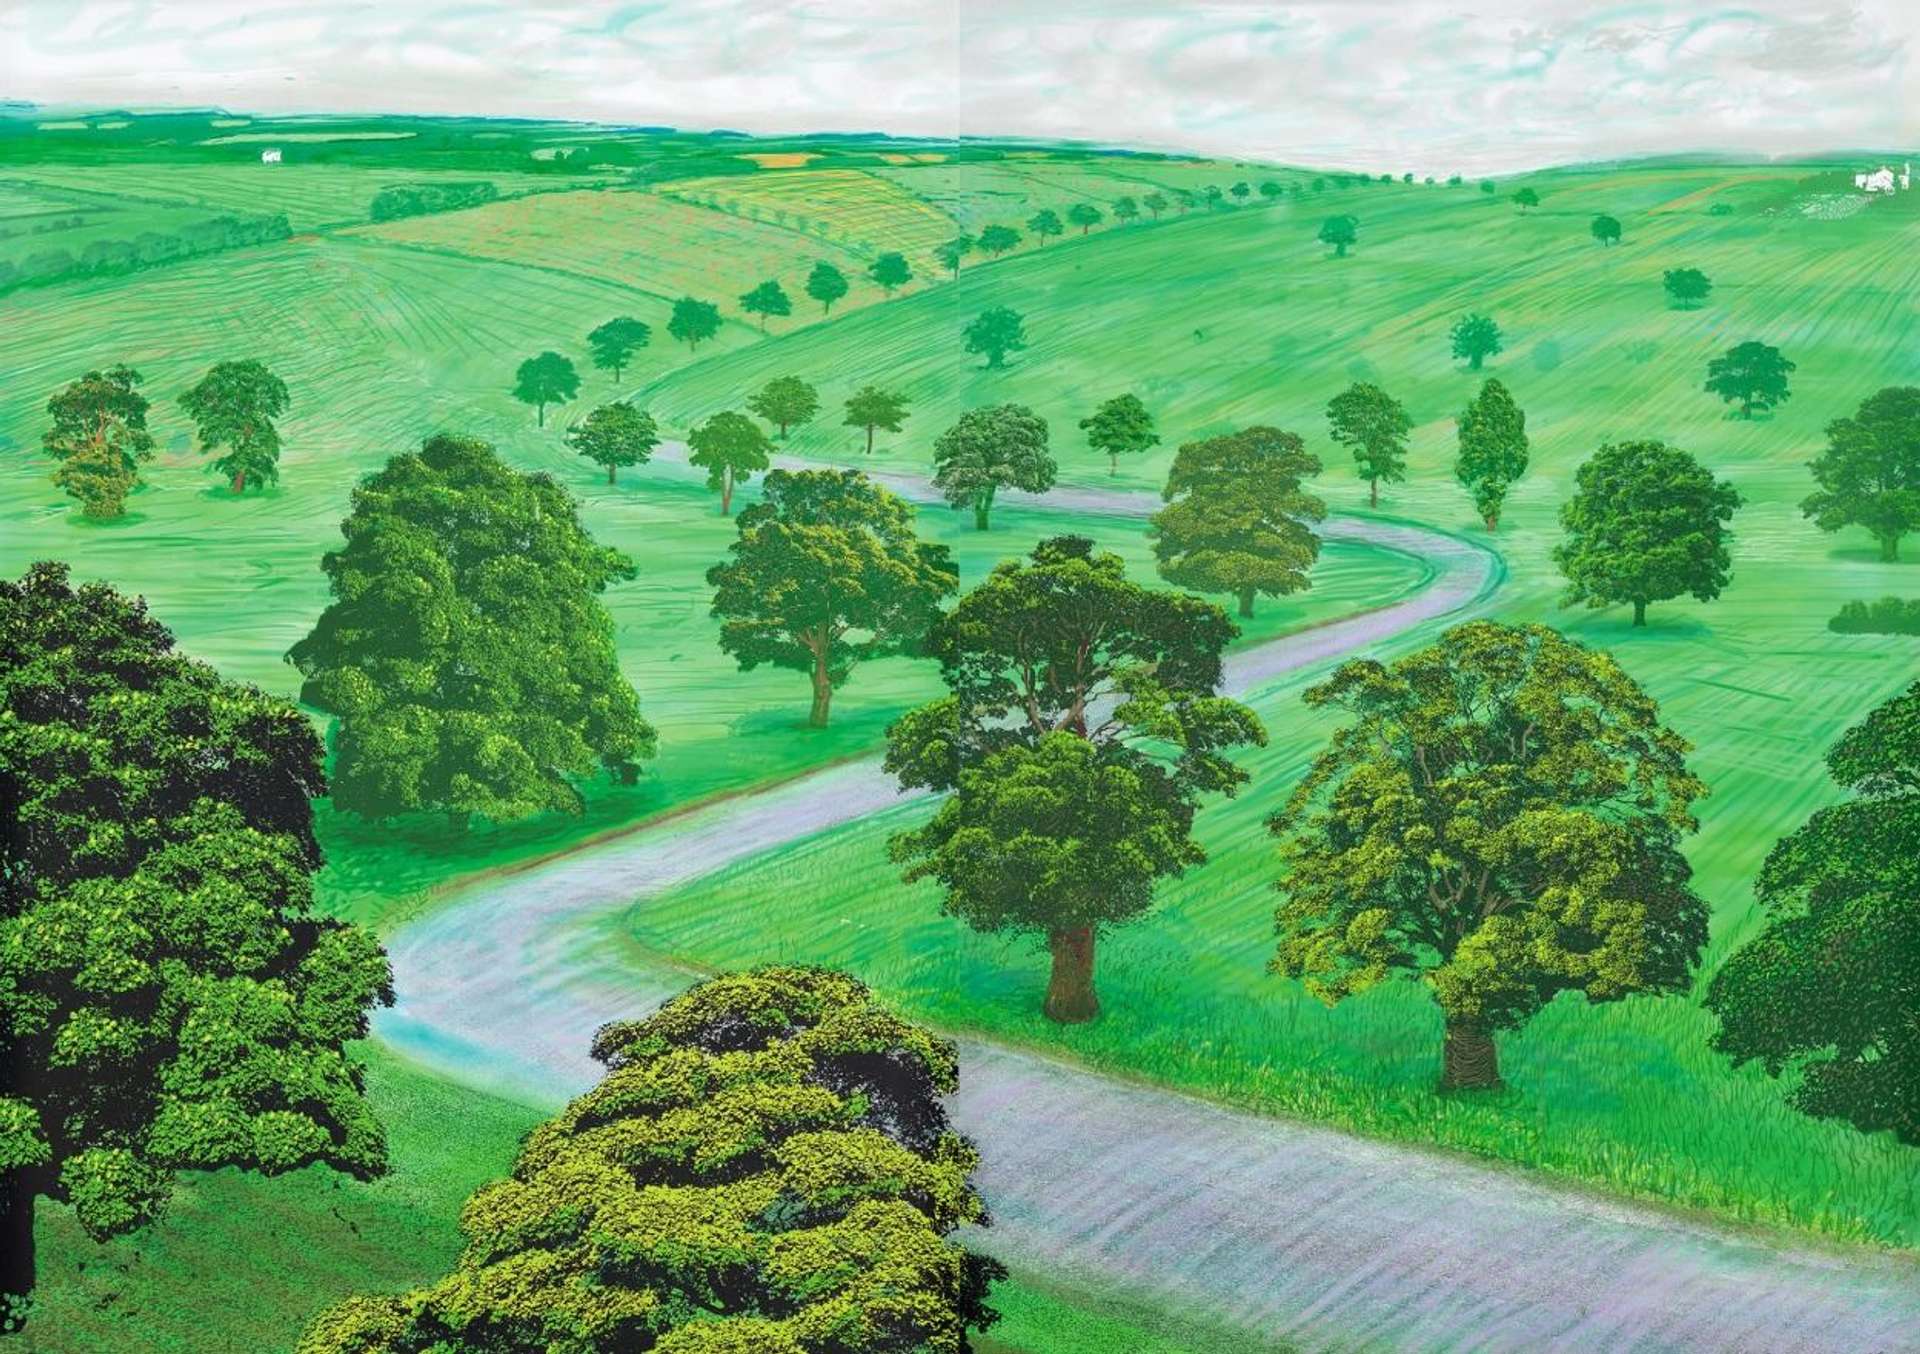 A digital print by David Hockney depicting a green landscape of a winding road receding into the picture plane, lined with green trees